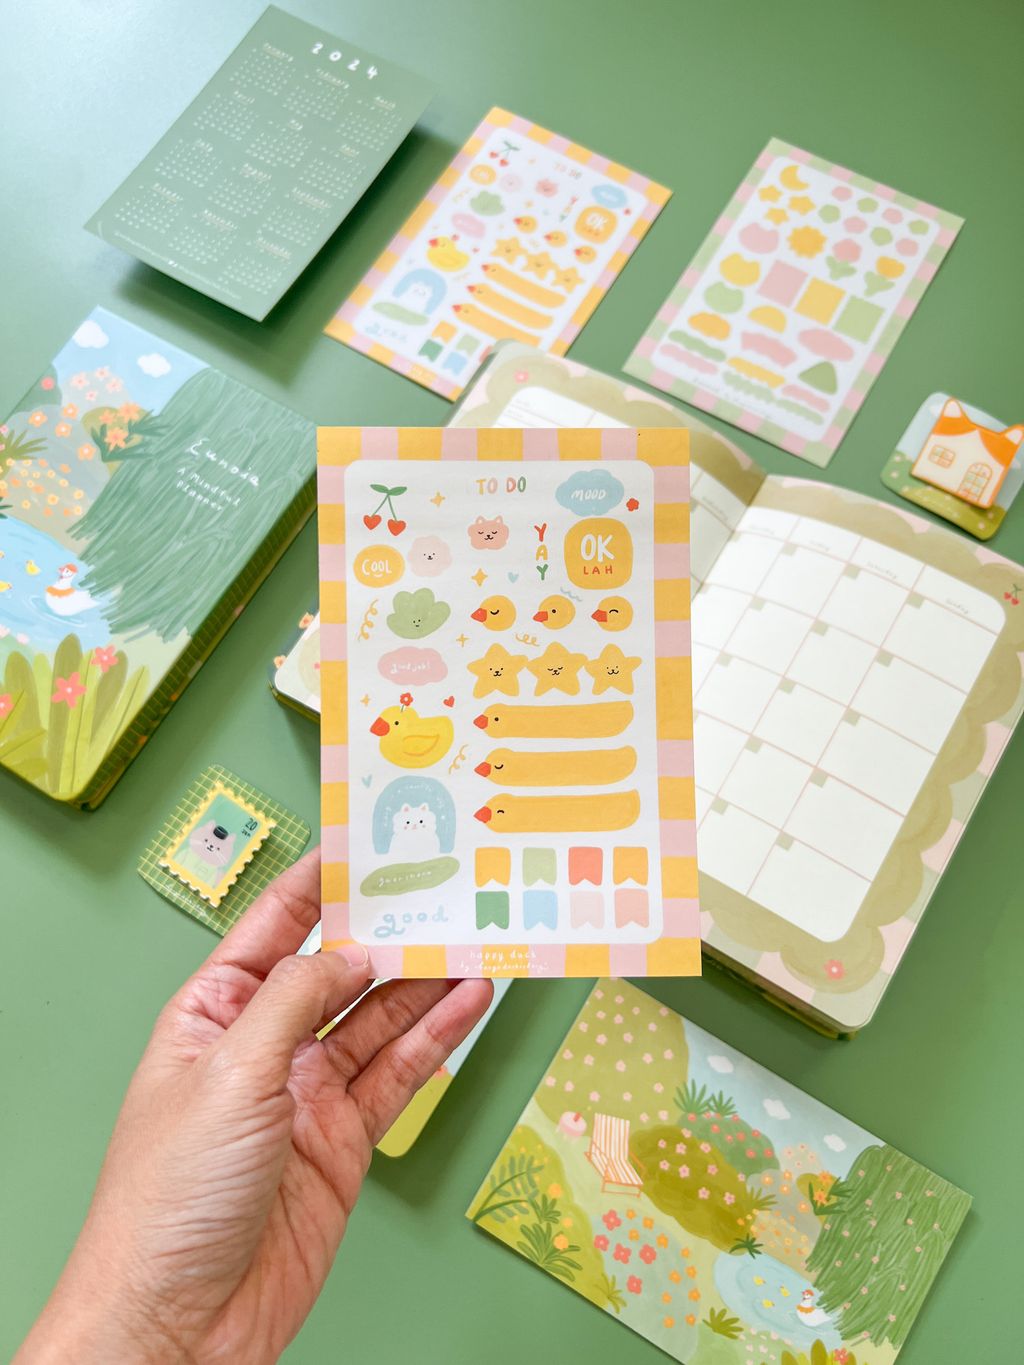 Eunoia Planner comes with Happy Duck and Bentuk Paper Sticker